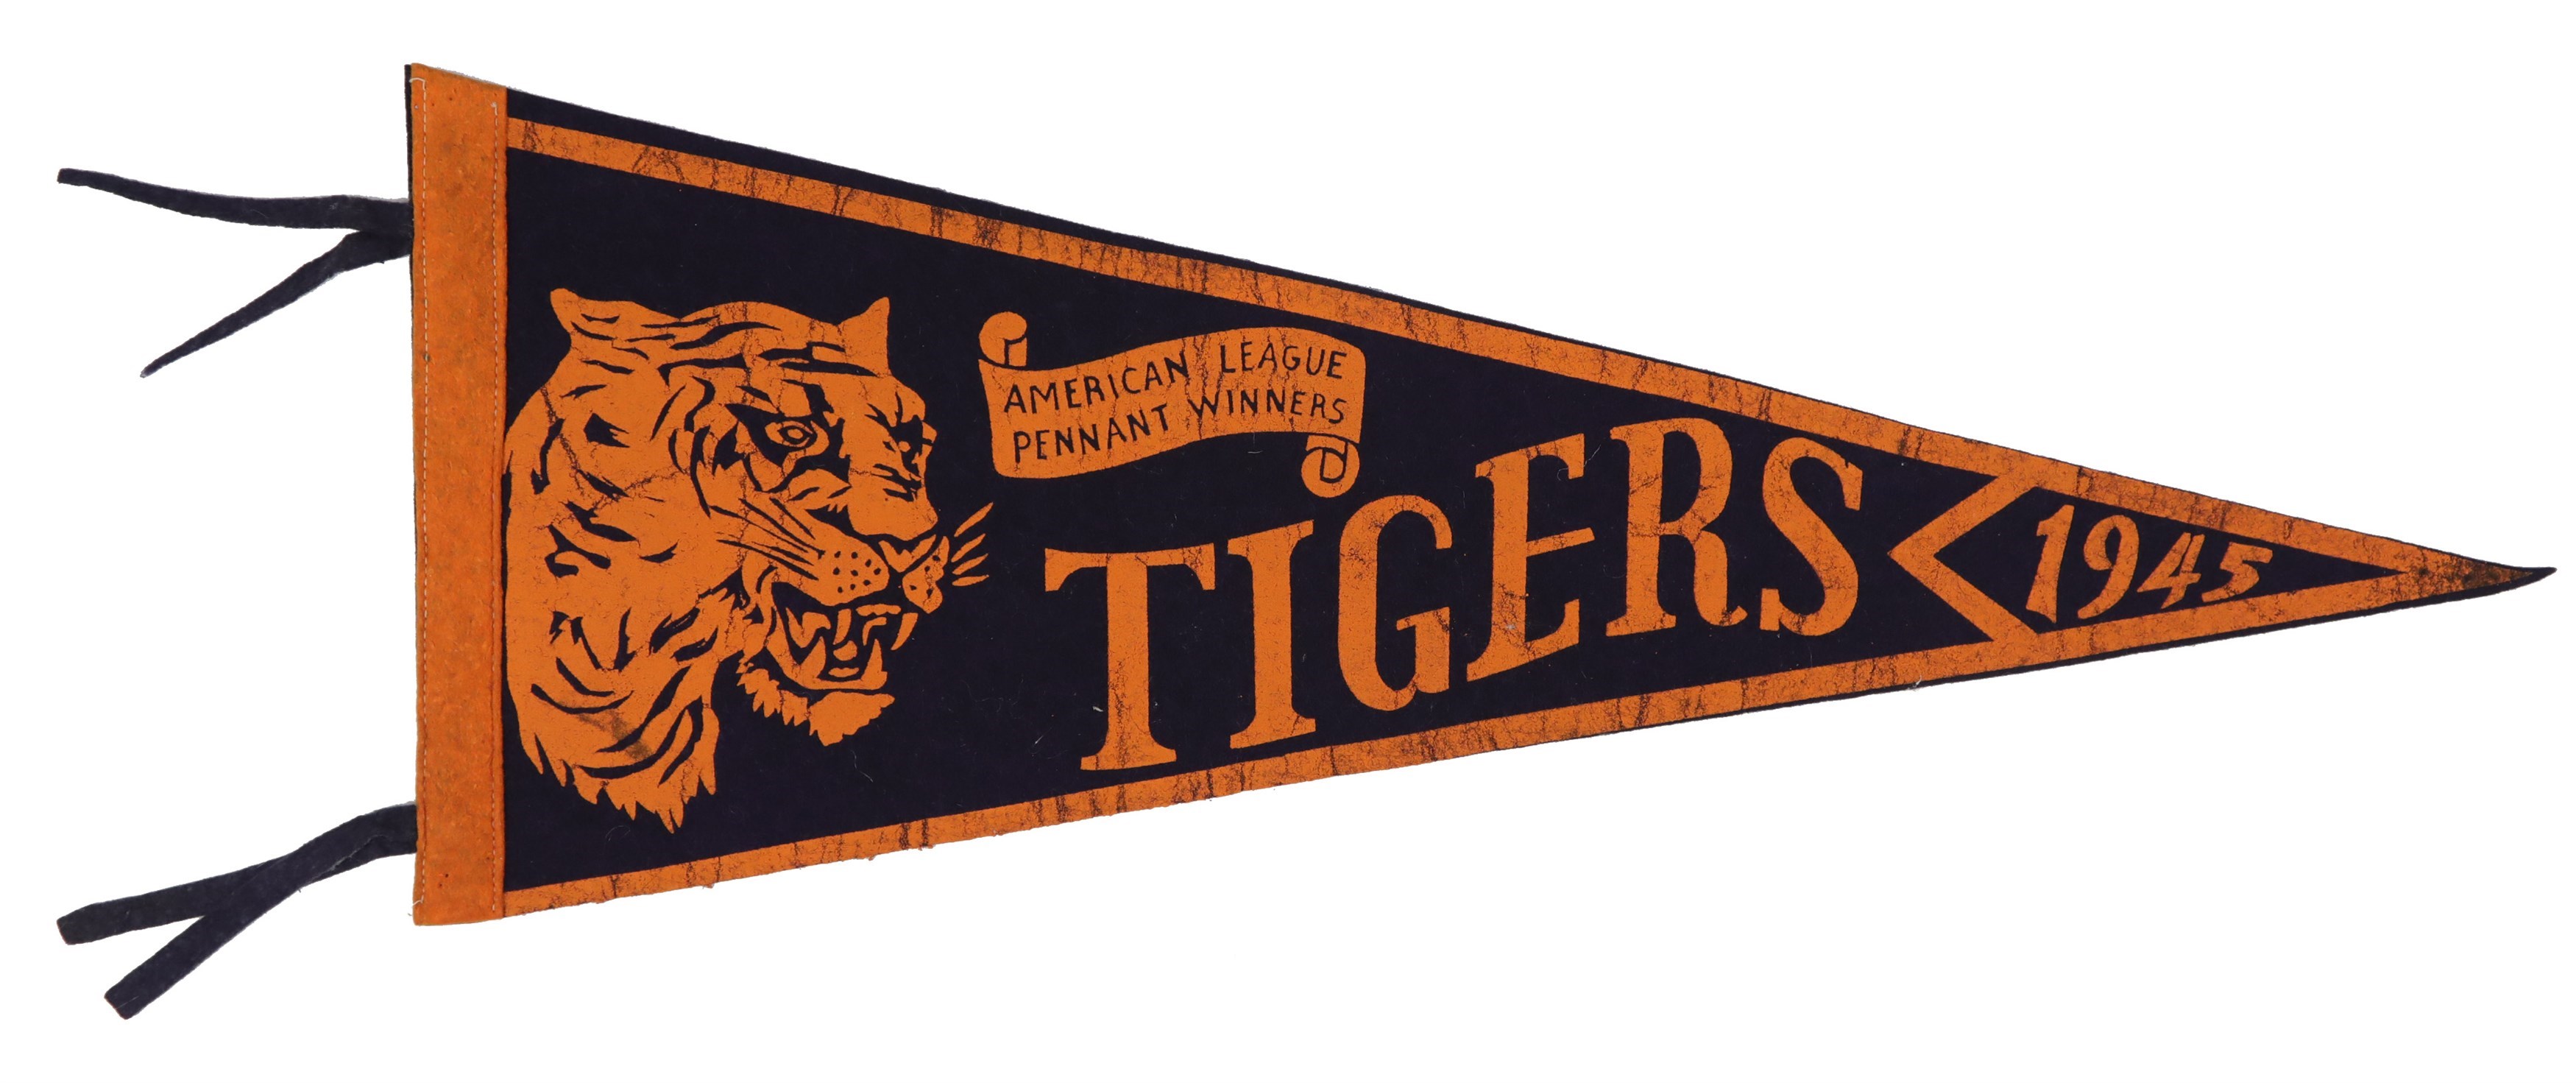 Ty Cobb and Detroit Tigers - 1945 Detroit Tigers American League Champions Pennant